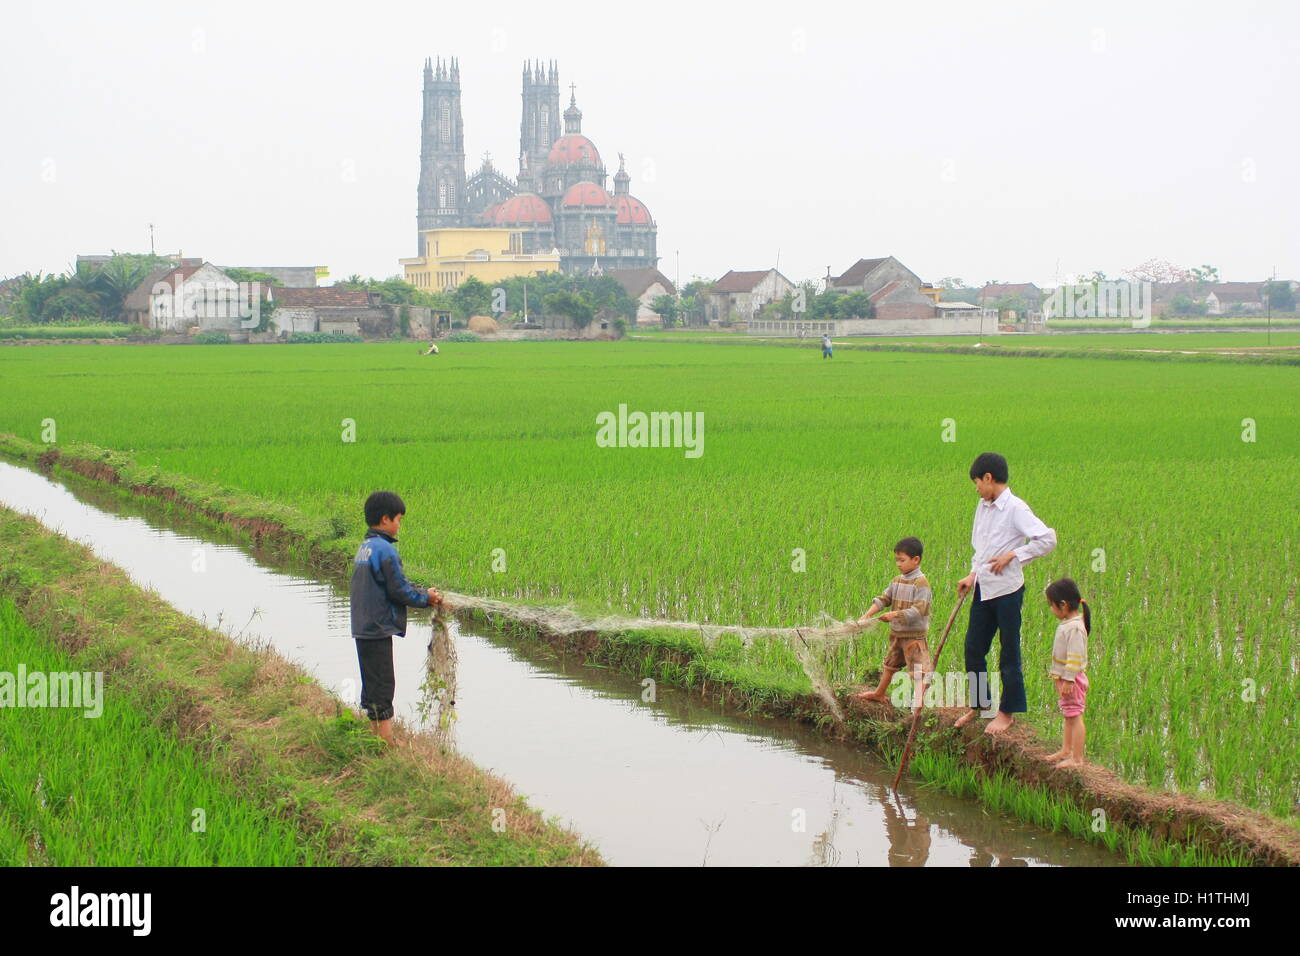 Nam Dinh, Vietnam - March 28, 2010: Children are playing in the paddy field in the countryside of the North of Vietnam Stock Photo